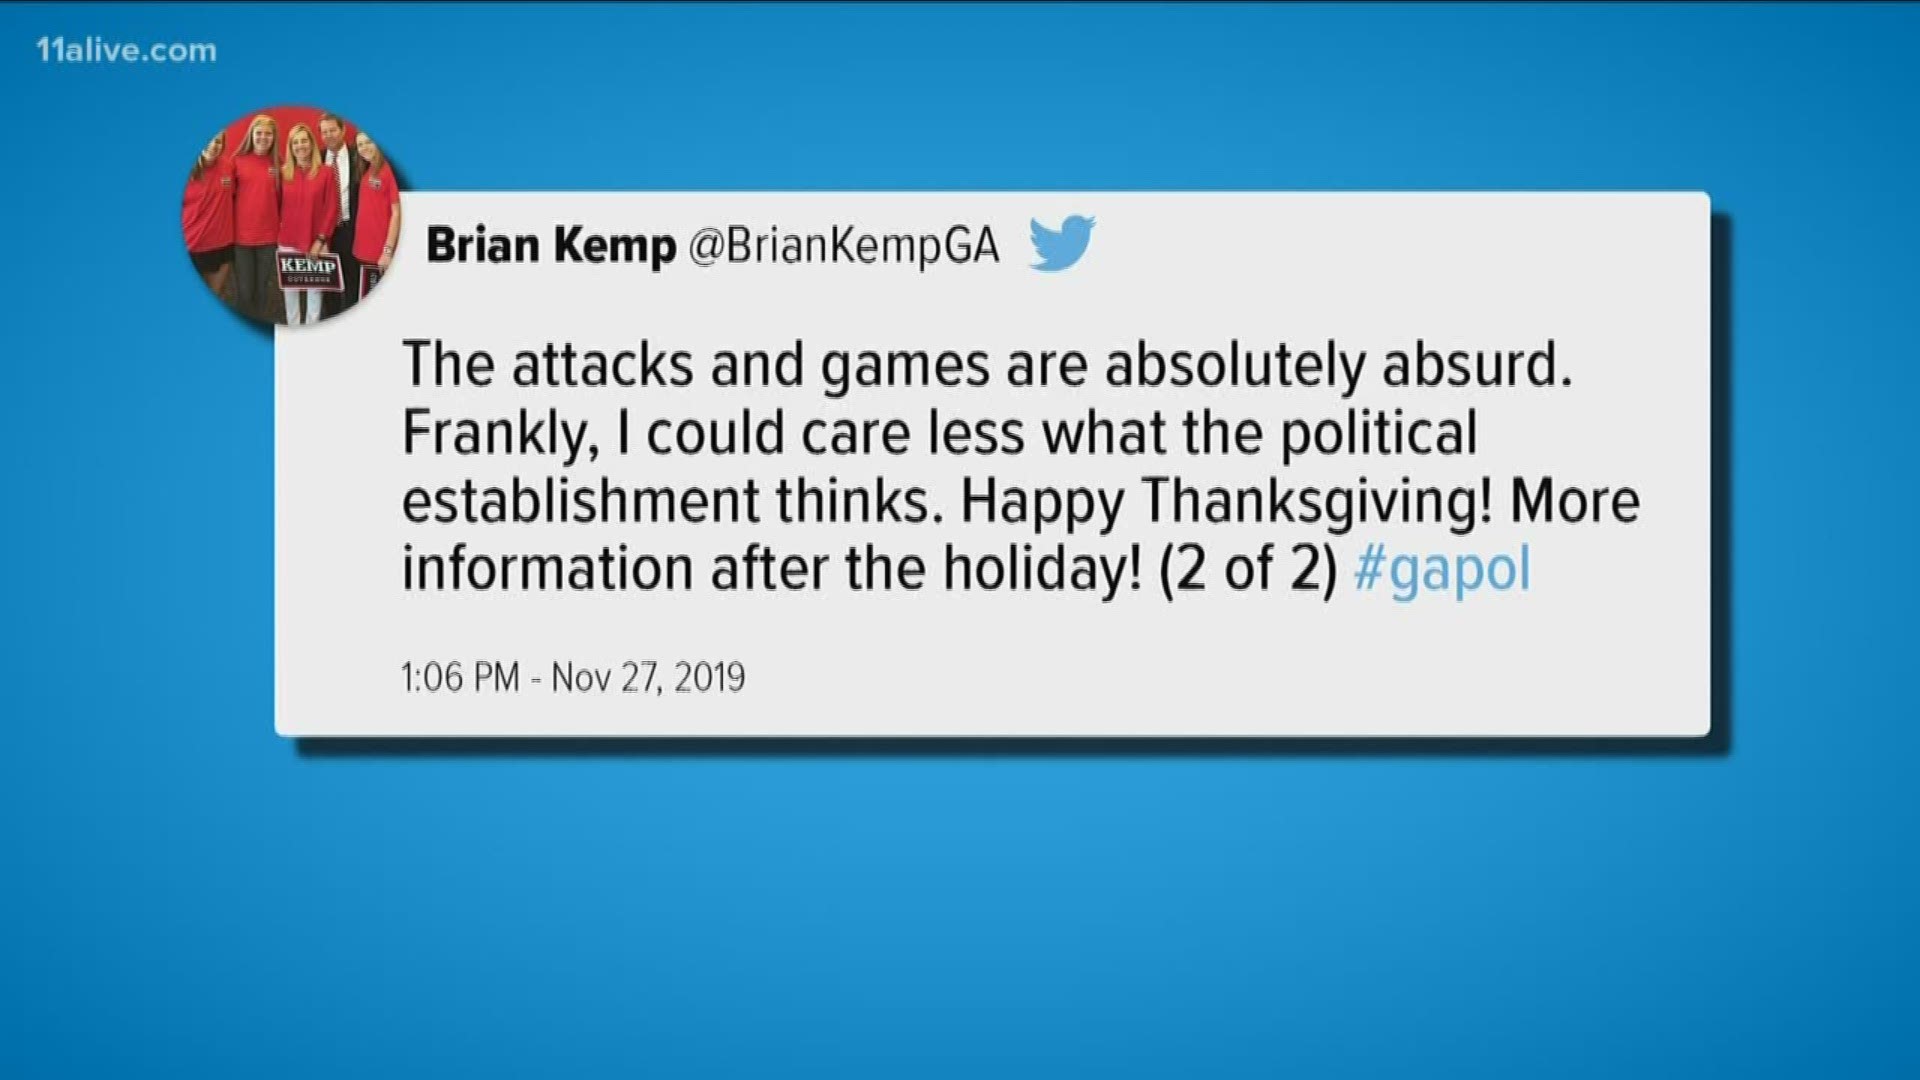 The Republican governor took to Twitter on Wednesday to slam the “attacks and games” and said more information about his choice would be available after Thanksgiving